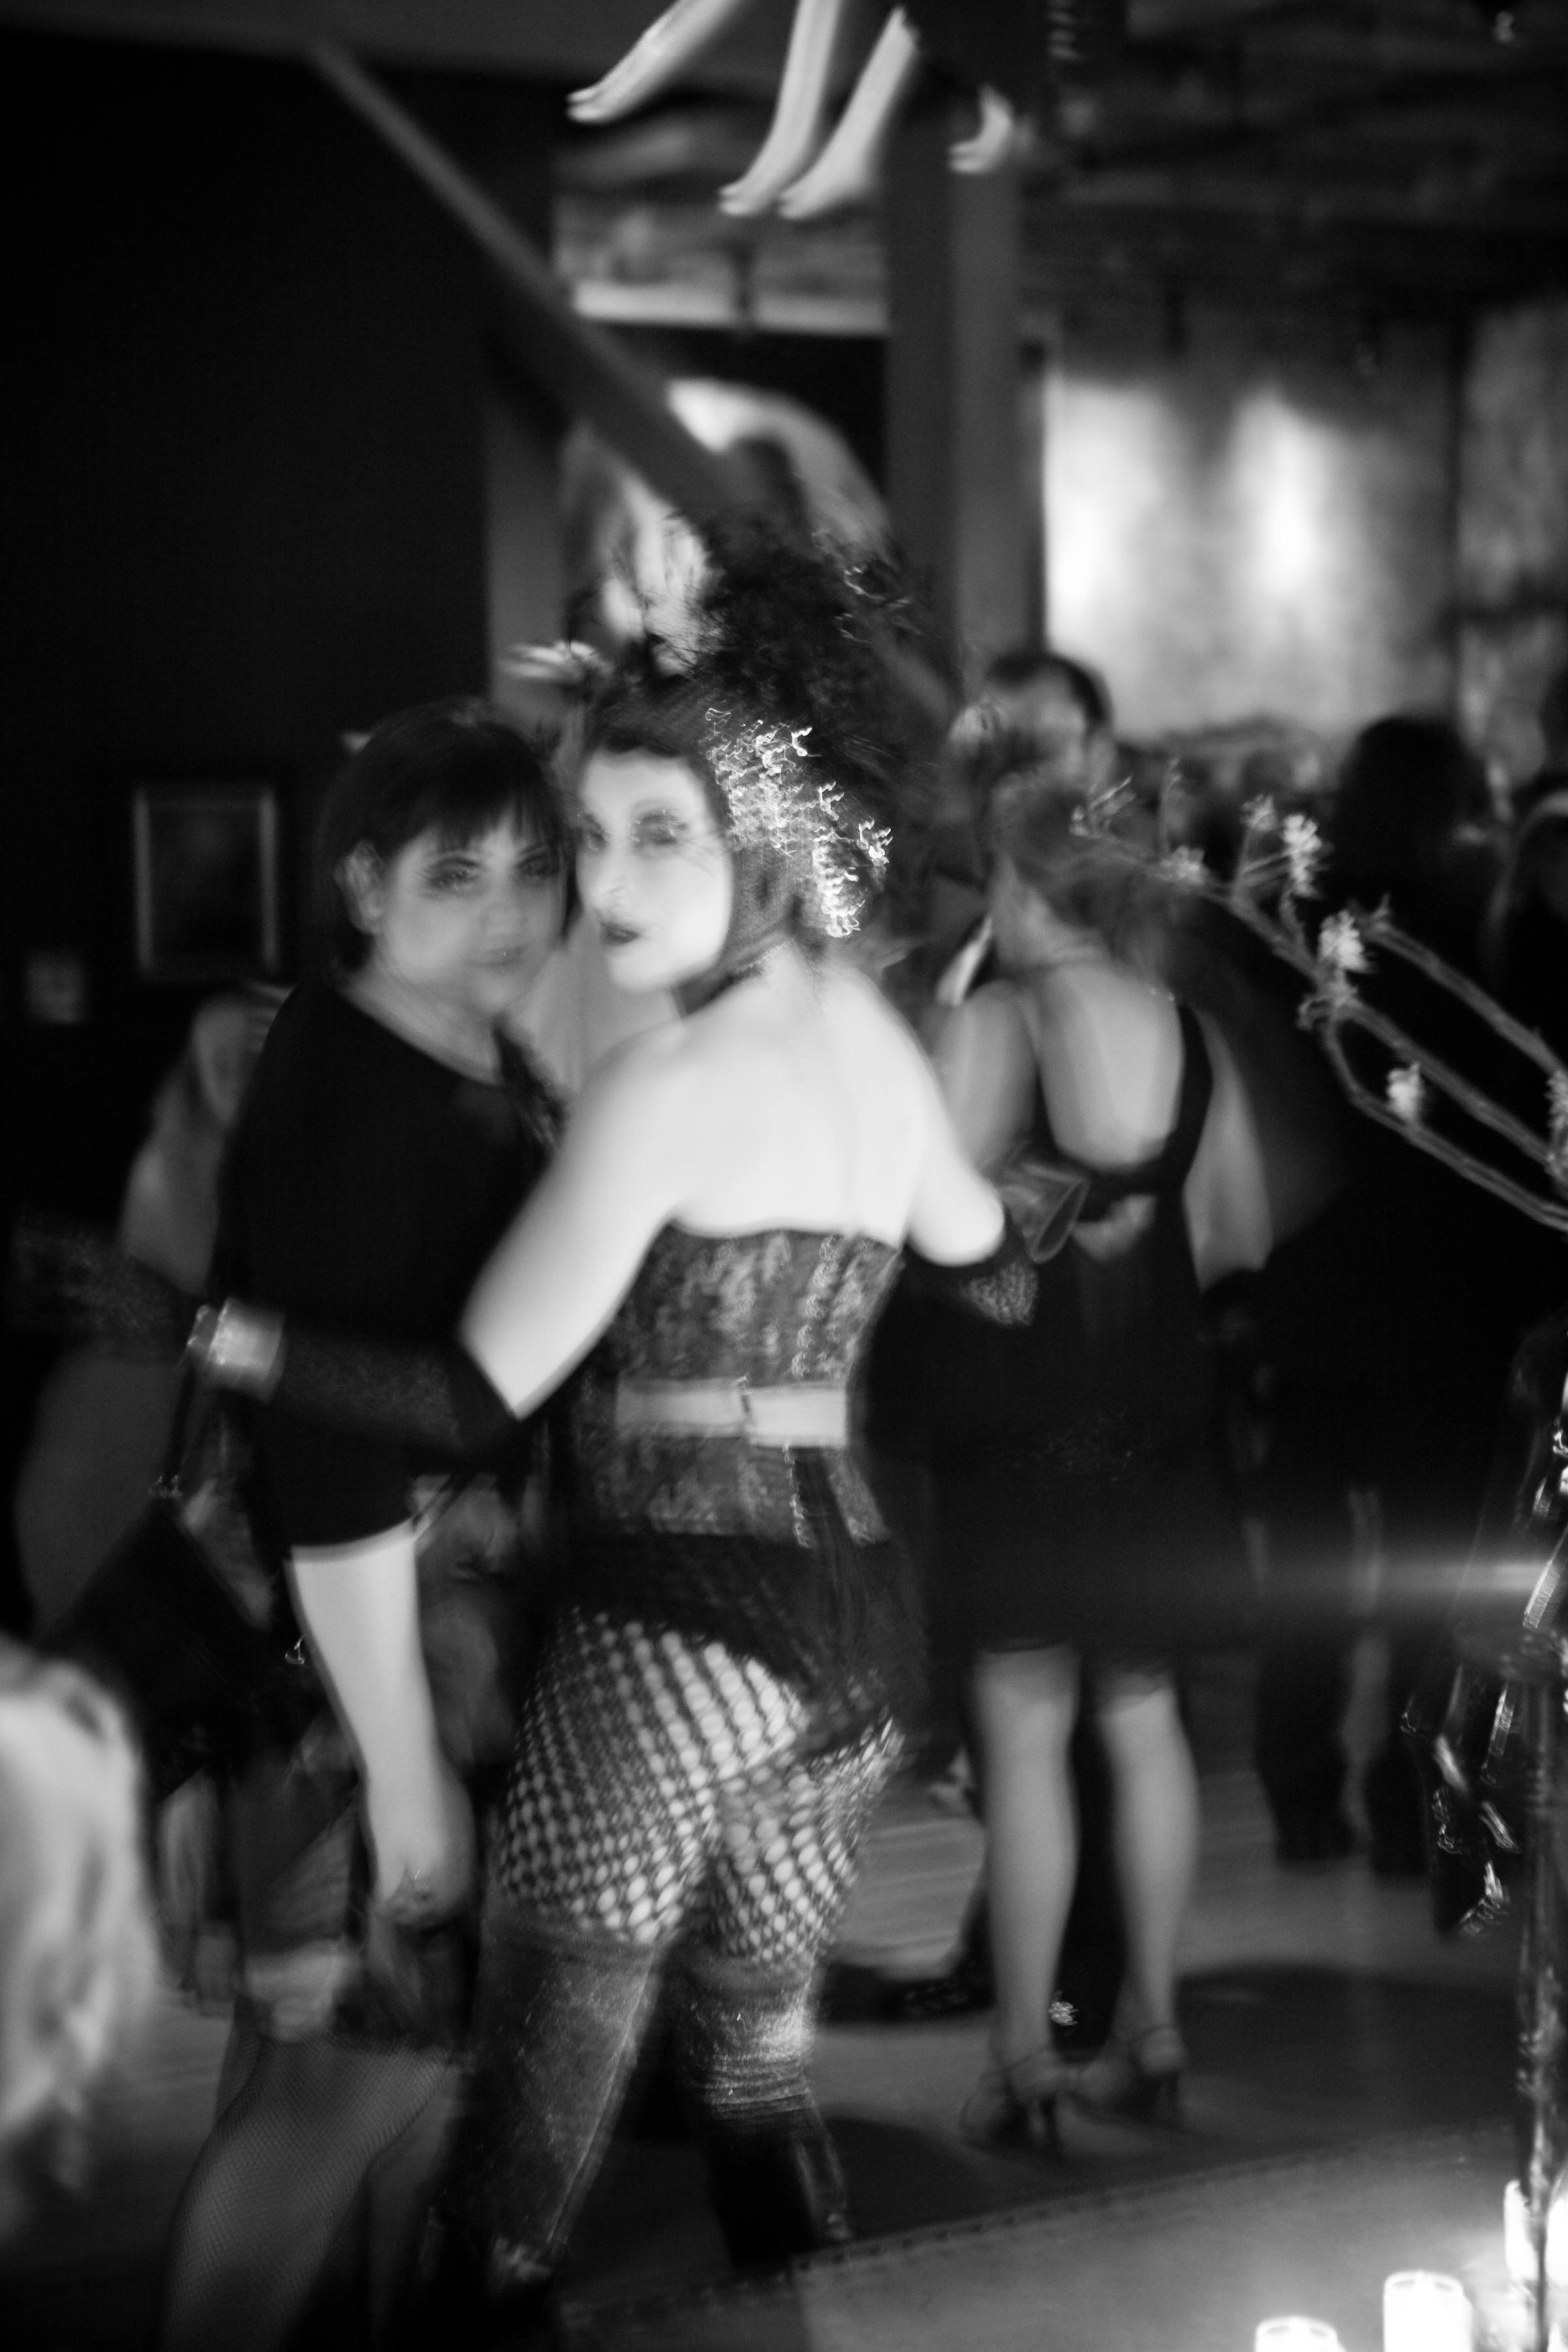 A black and white image shows two people in elaborate costumes, one with a feathered headpiece. Blurry effects and multiple other figures are in the dimly lit background.